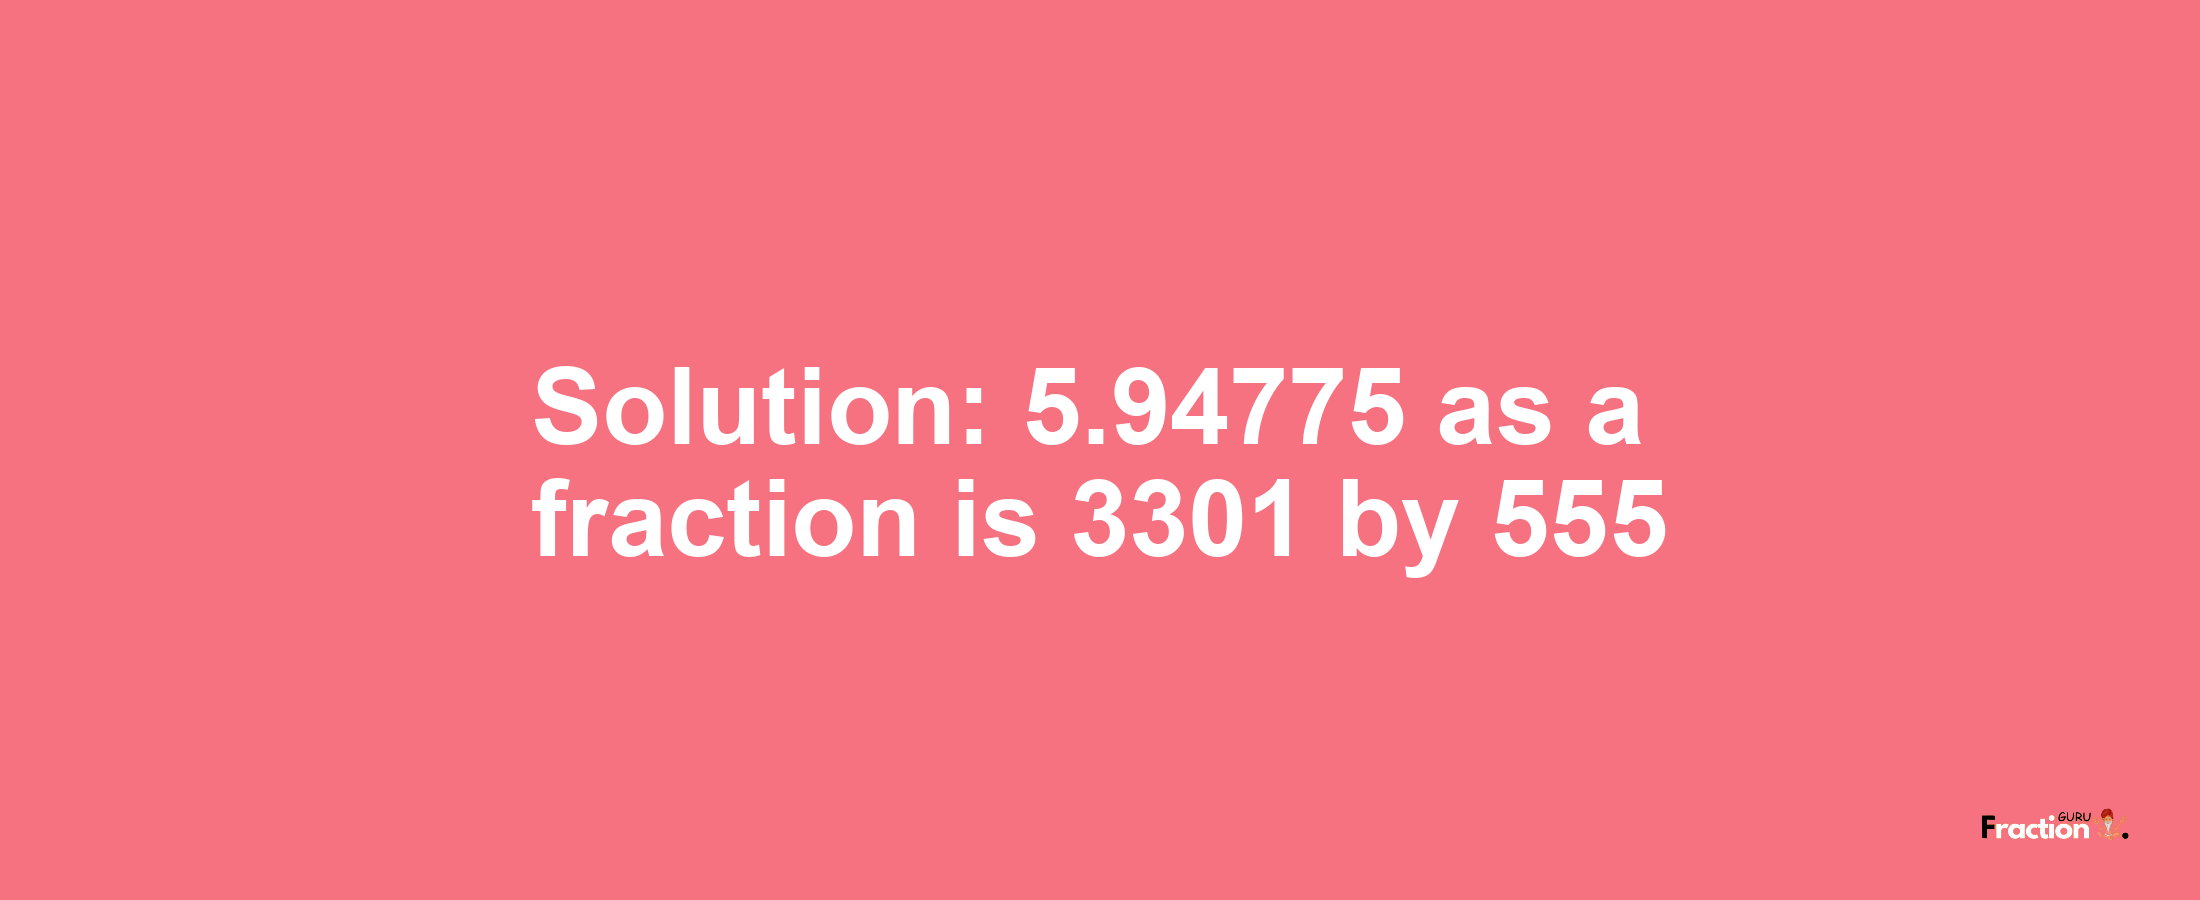 Solution:5.94775 as a fraction is 3301/555